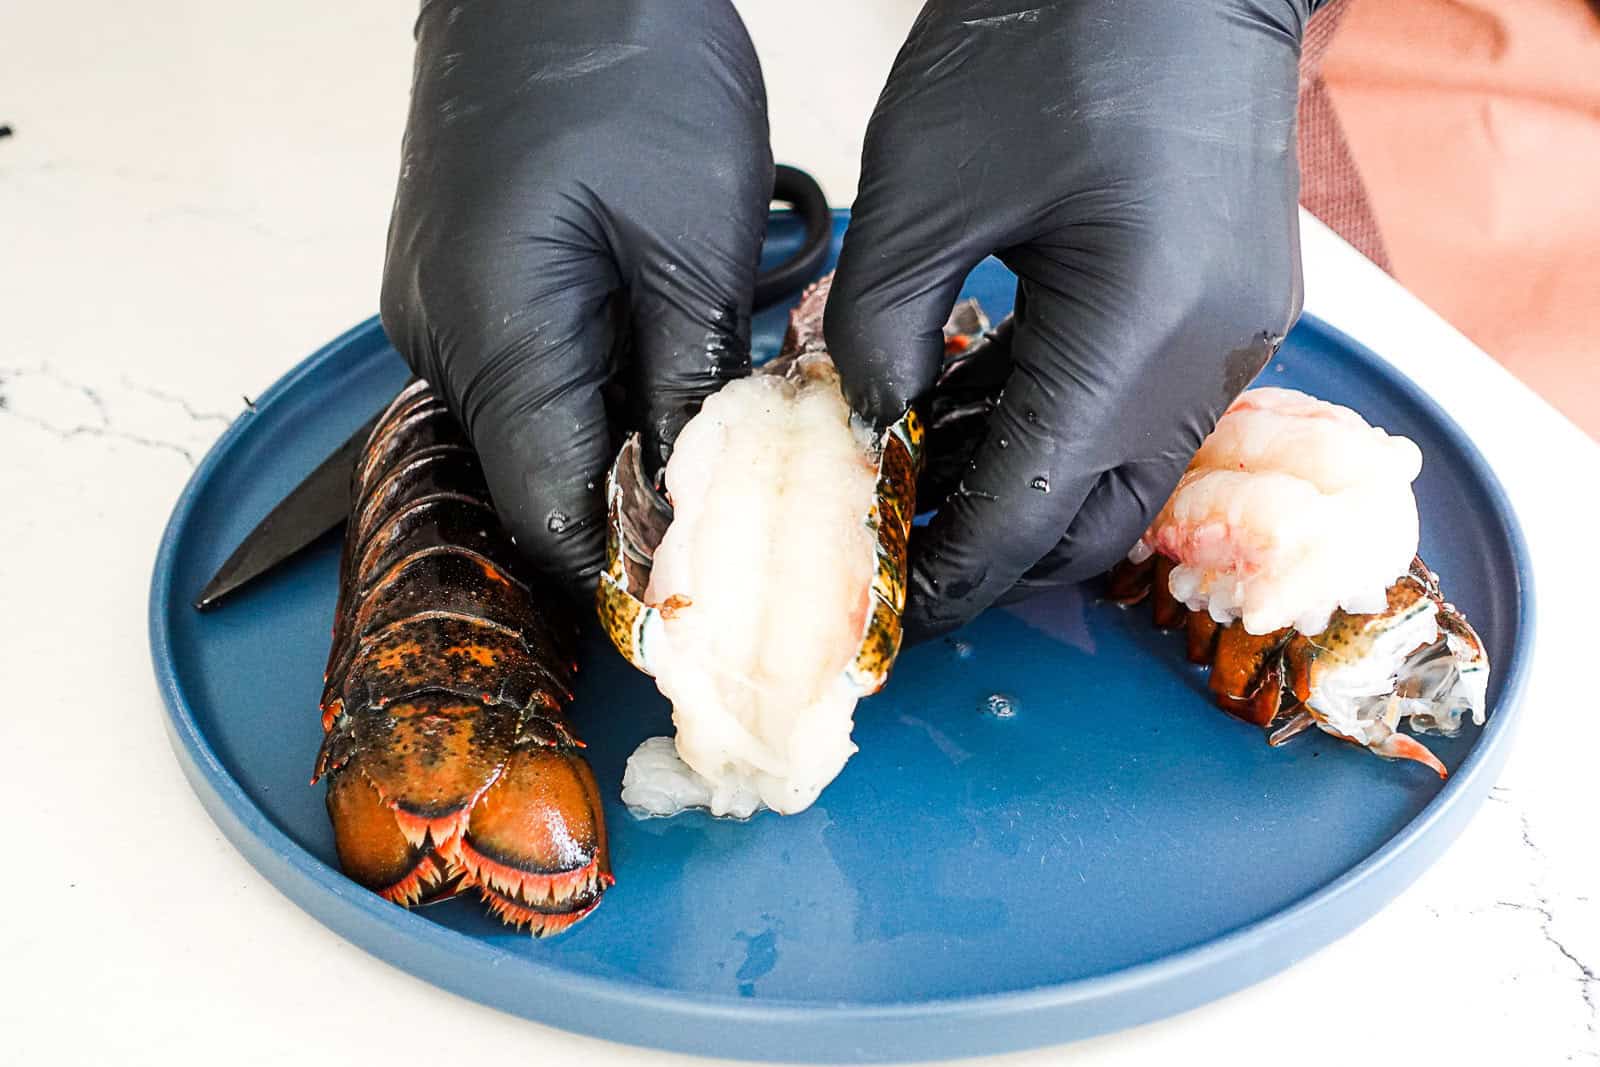 Removing meat from lobster tail before grilling